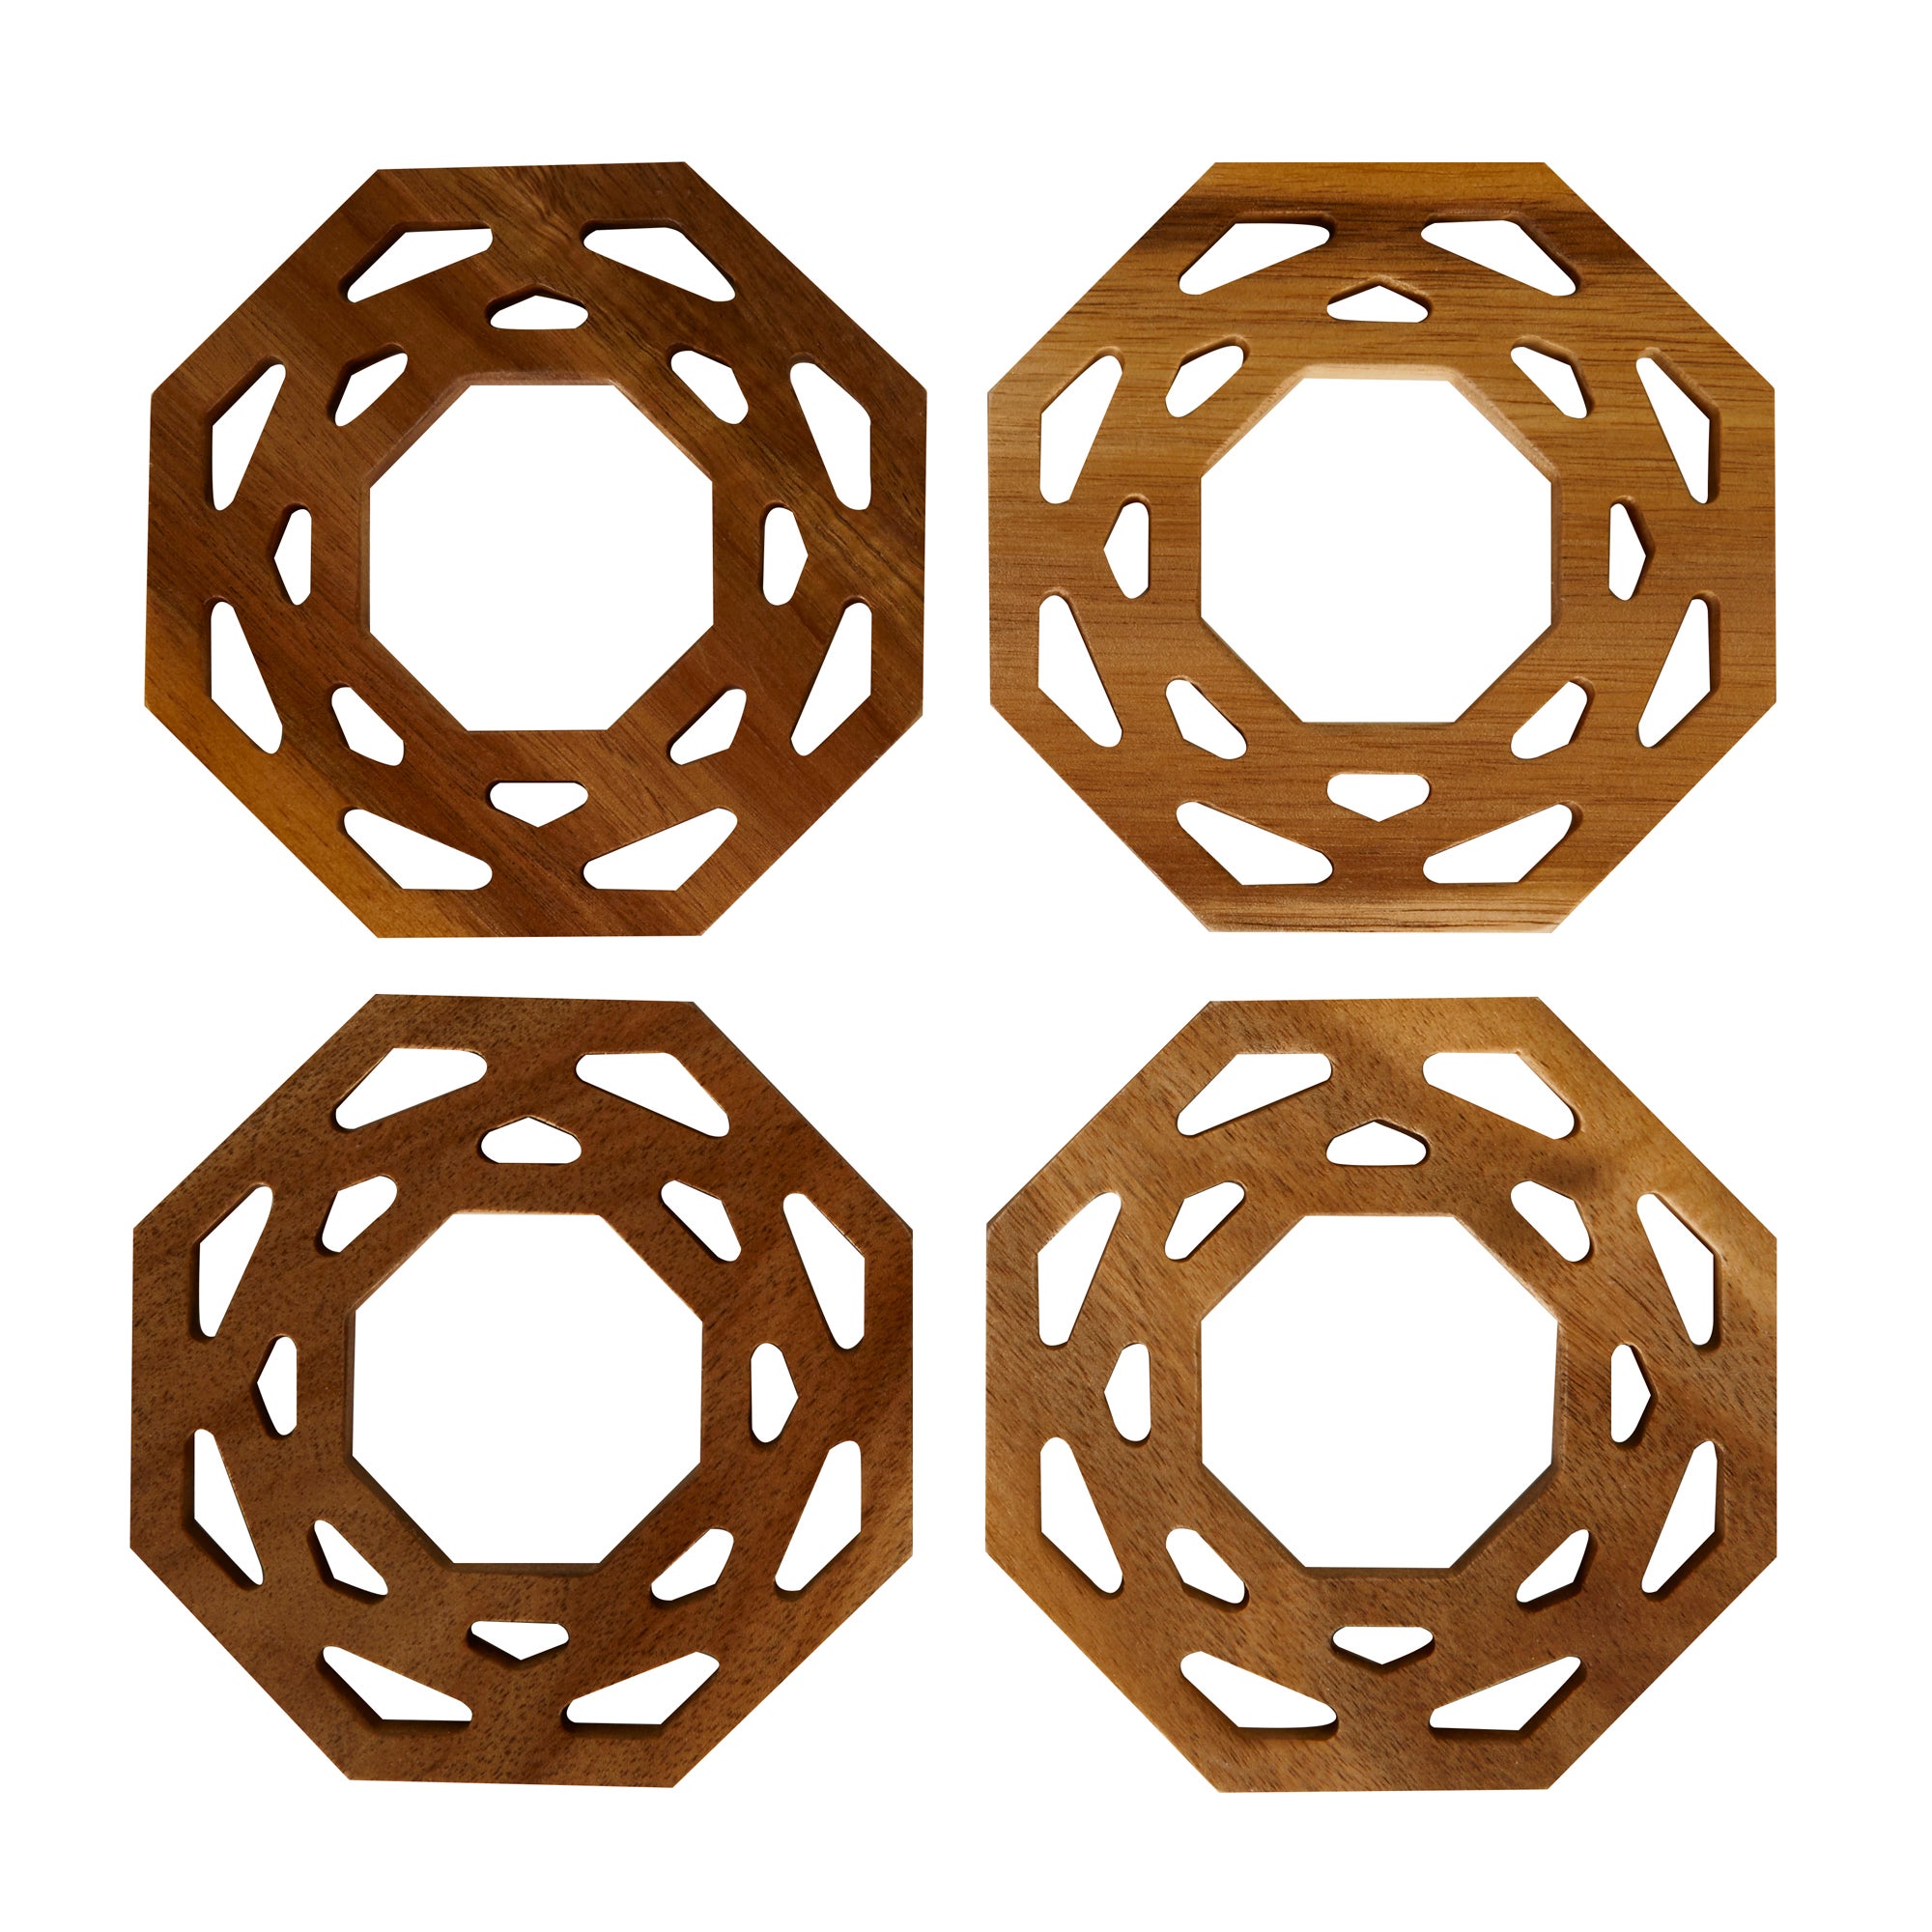 Set of 4 Wooden Cut Out Coasters